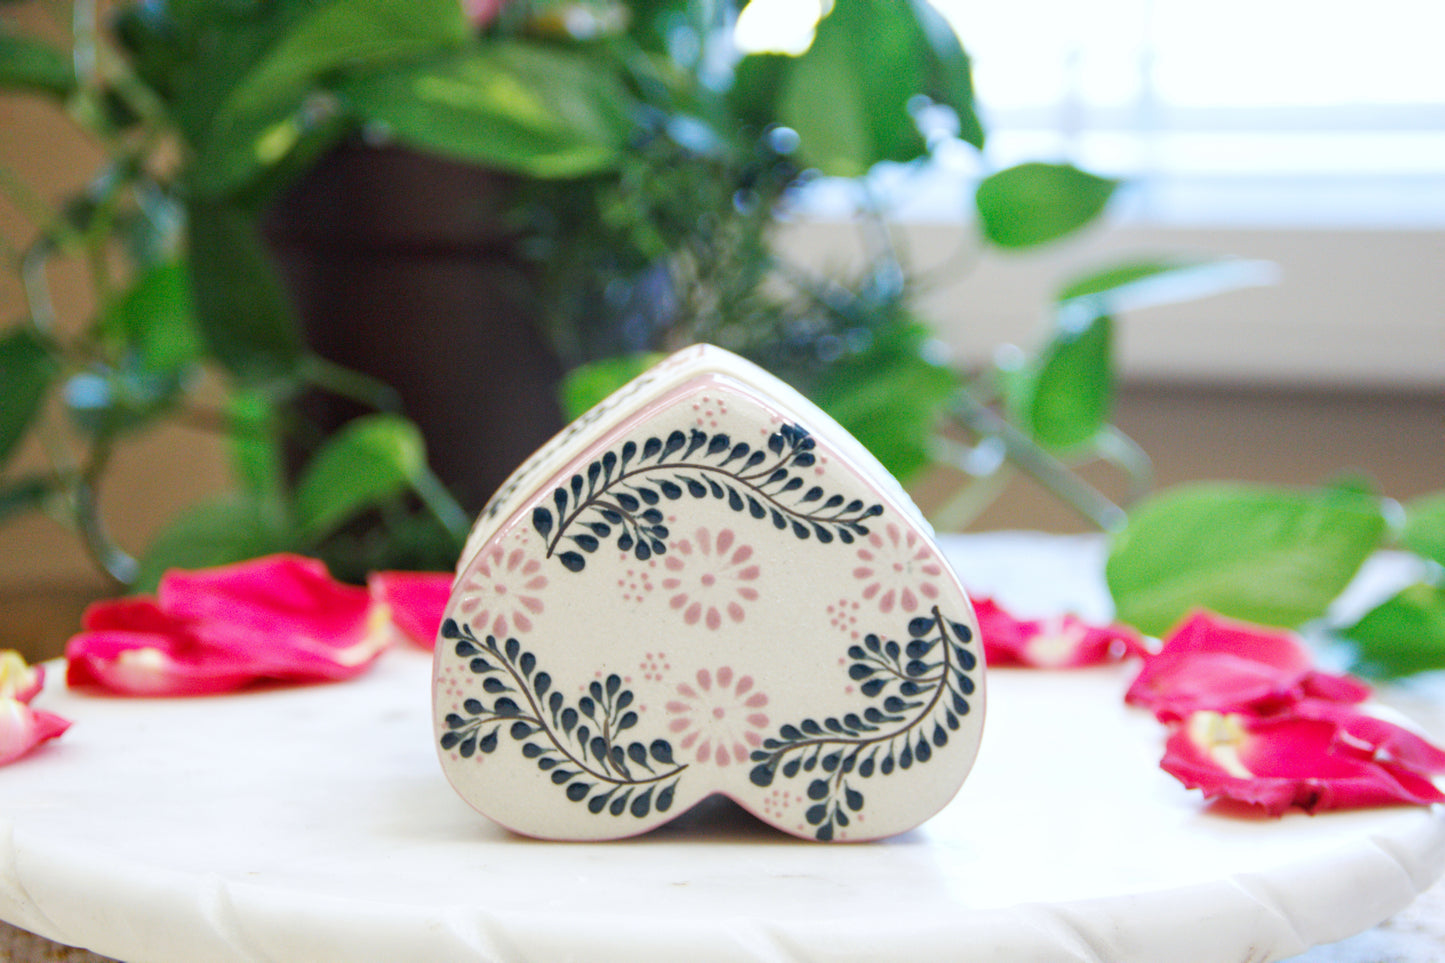 upside down view of an Artisanal candle in a beautiful heart shaped talavera. Handmade pink floral design with a closed lid. Handcrafted by Artisan in Mexico City. 100% All Natural Soy Candle. Reuse the talavera as home decor or storage.